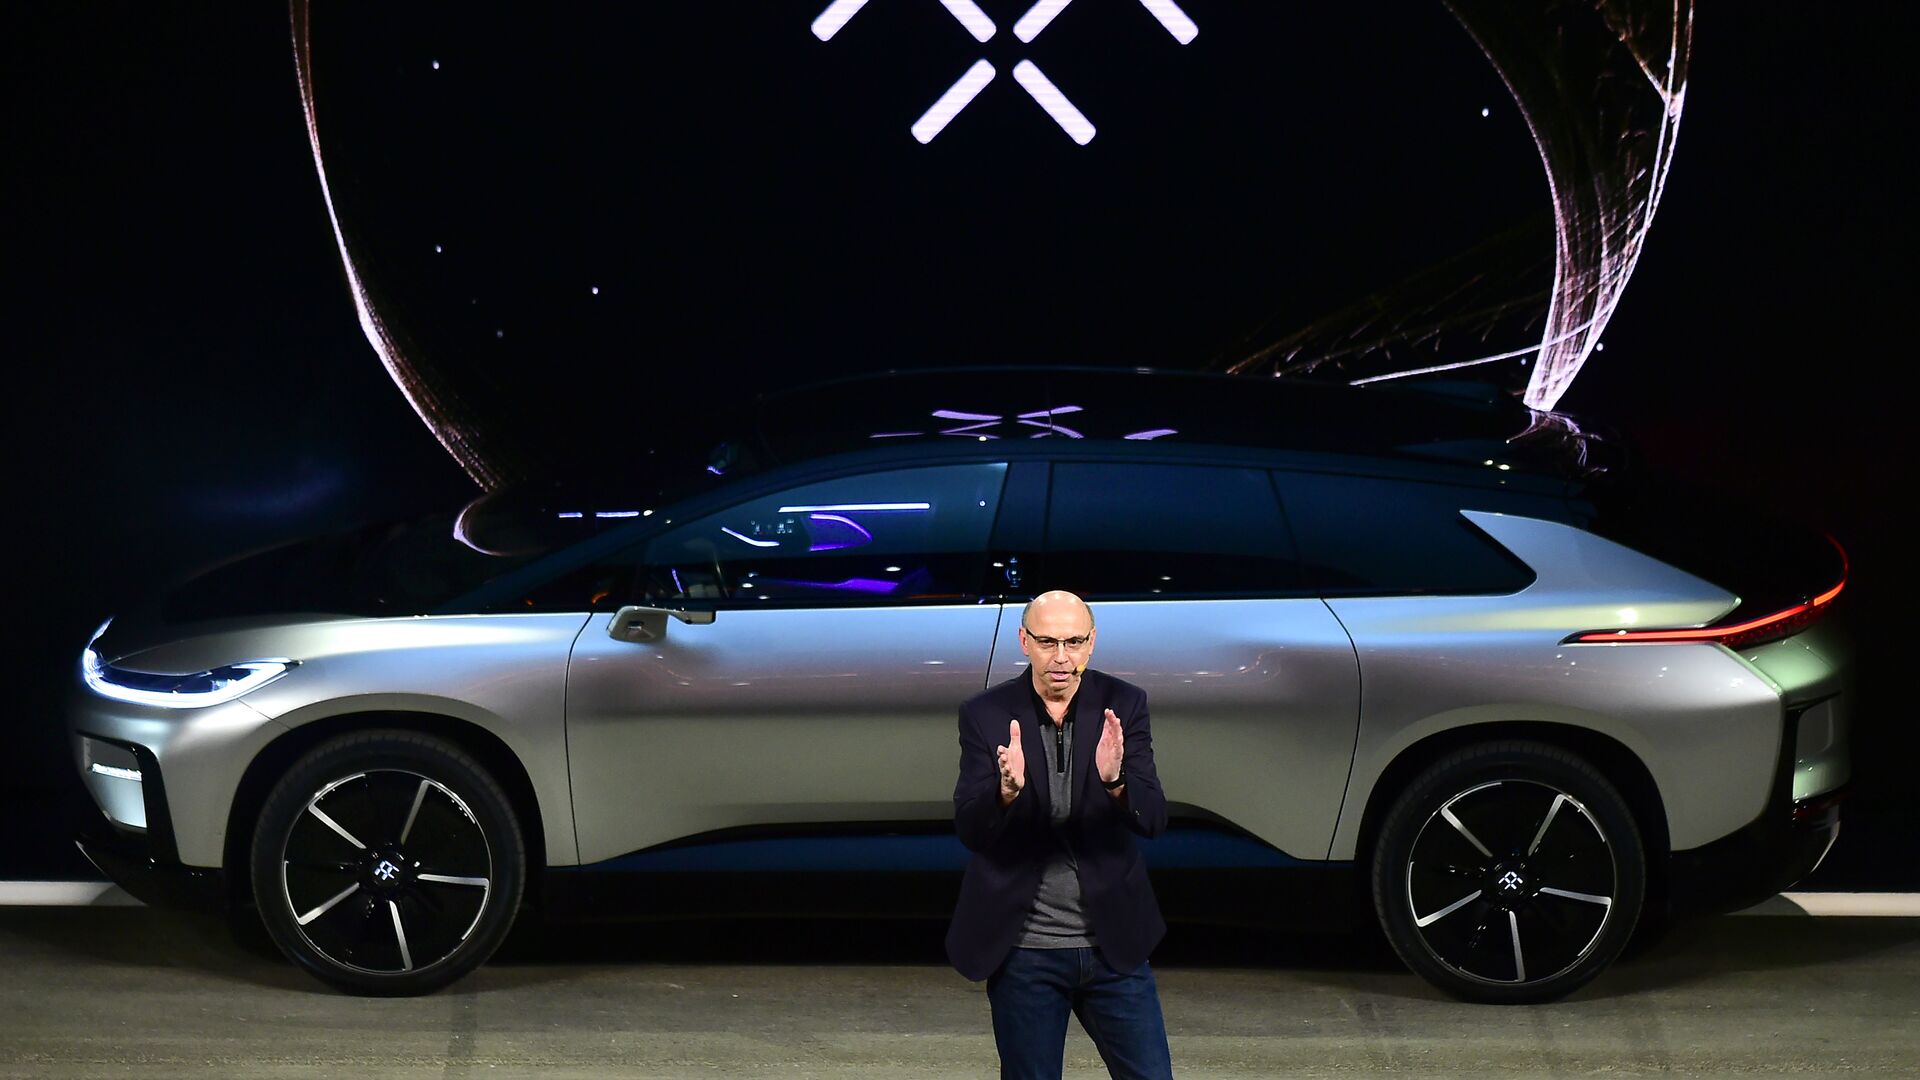 araday Future's Nick Sampson, SVP of R&D + Engineering speaks in front of the just introduced FF91 electric vehicle at the company's press conference at the 2017 Consumer Electronics Show in Las Vegas, January, 2016. - Sputnik International, 1920, 29.11.2023